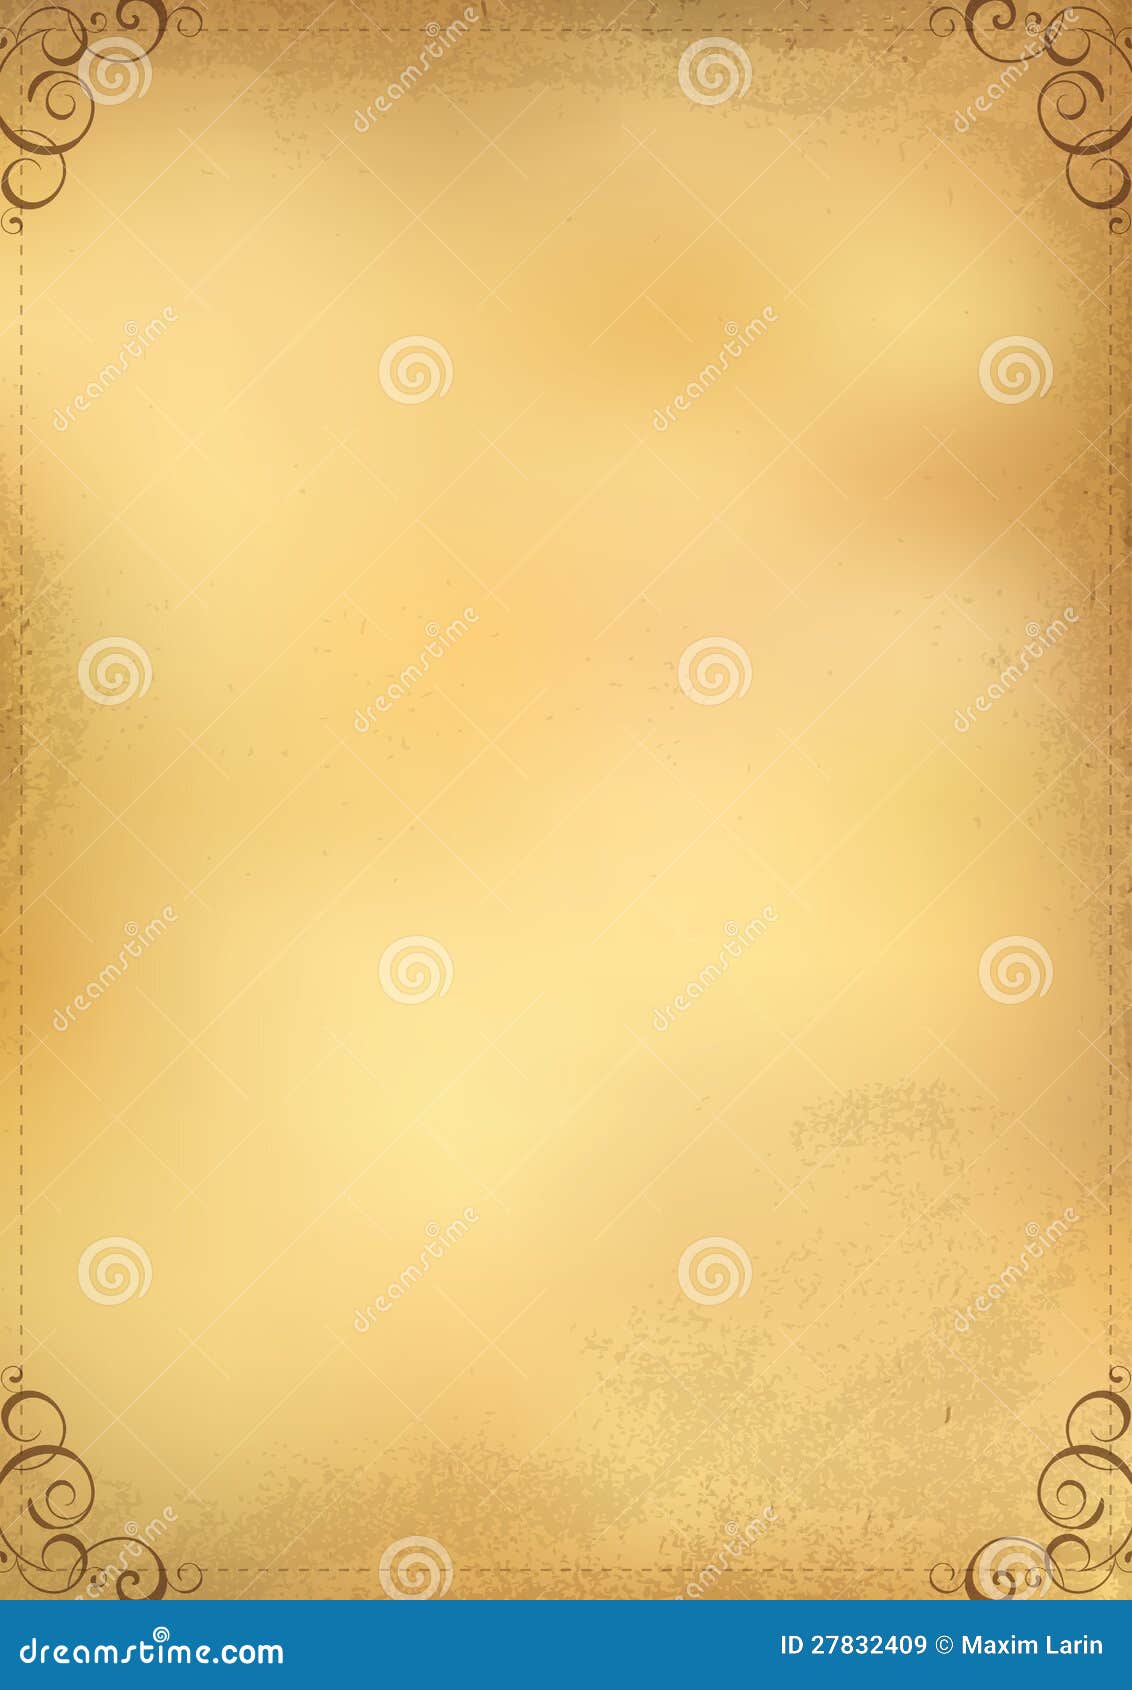 Design The Menu Background Stock Vector Illustration Of Cover